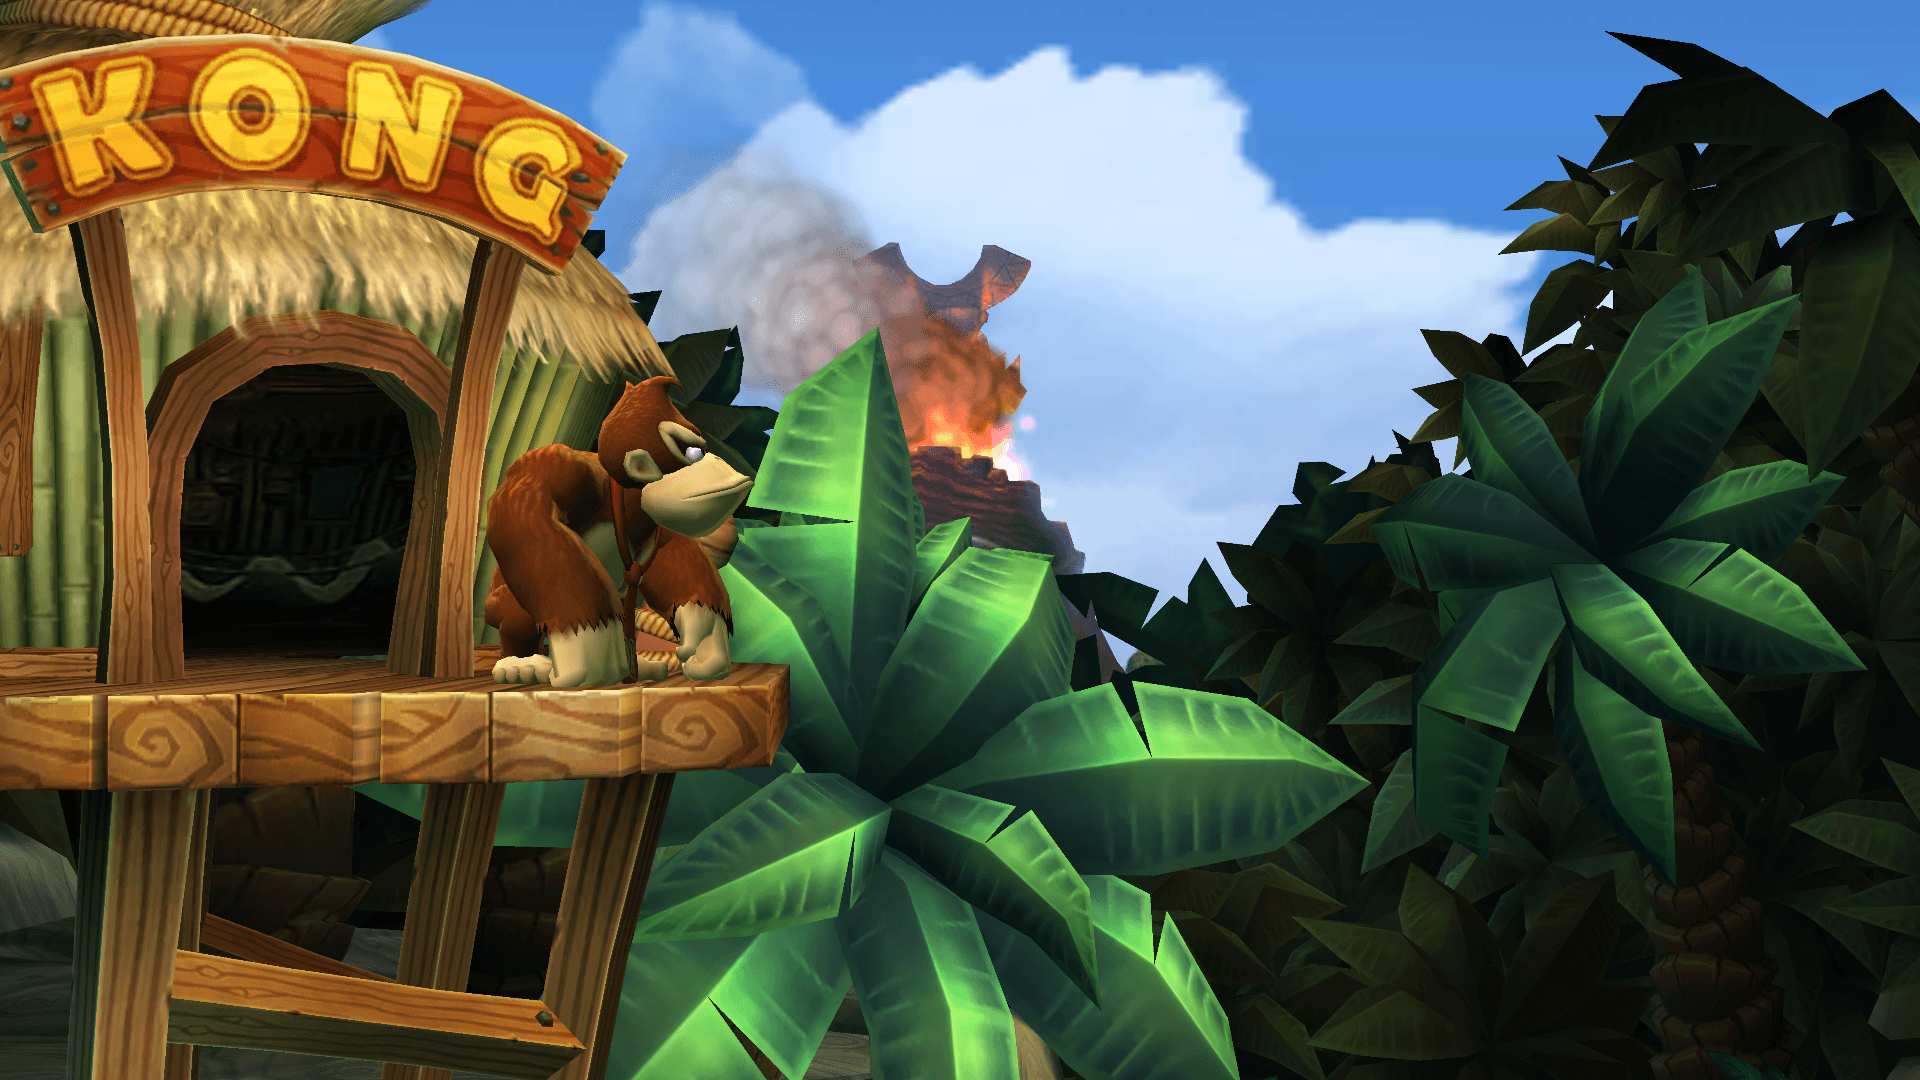 Donkey Kong and Diddy Kong's Treehouse